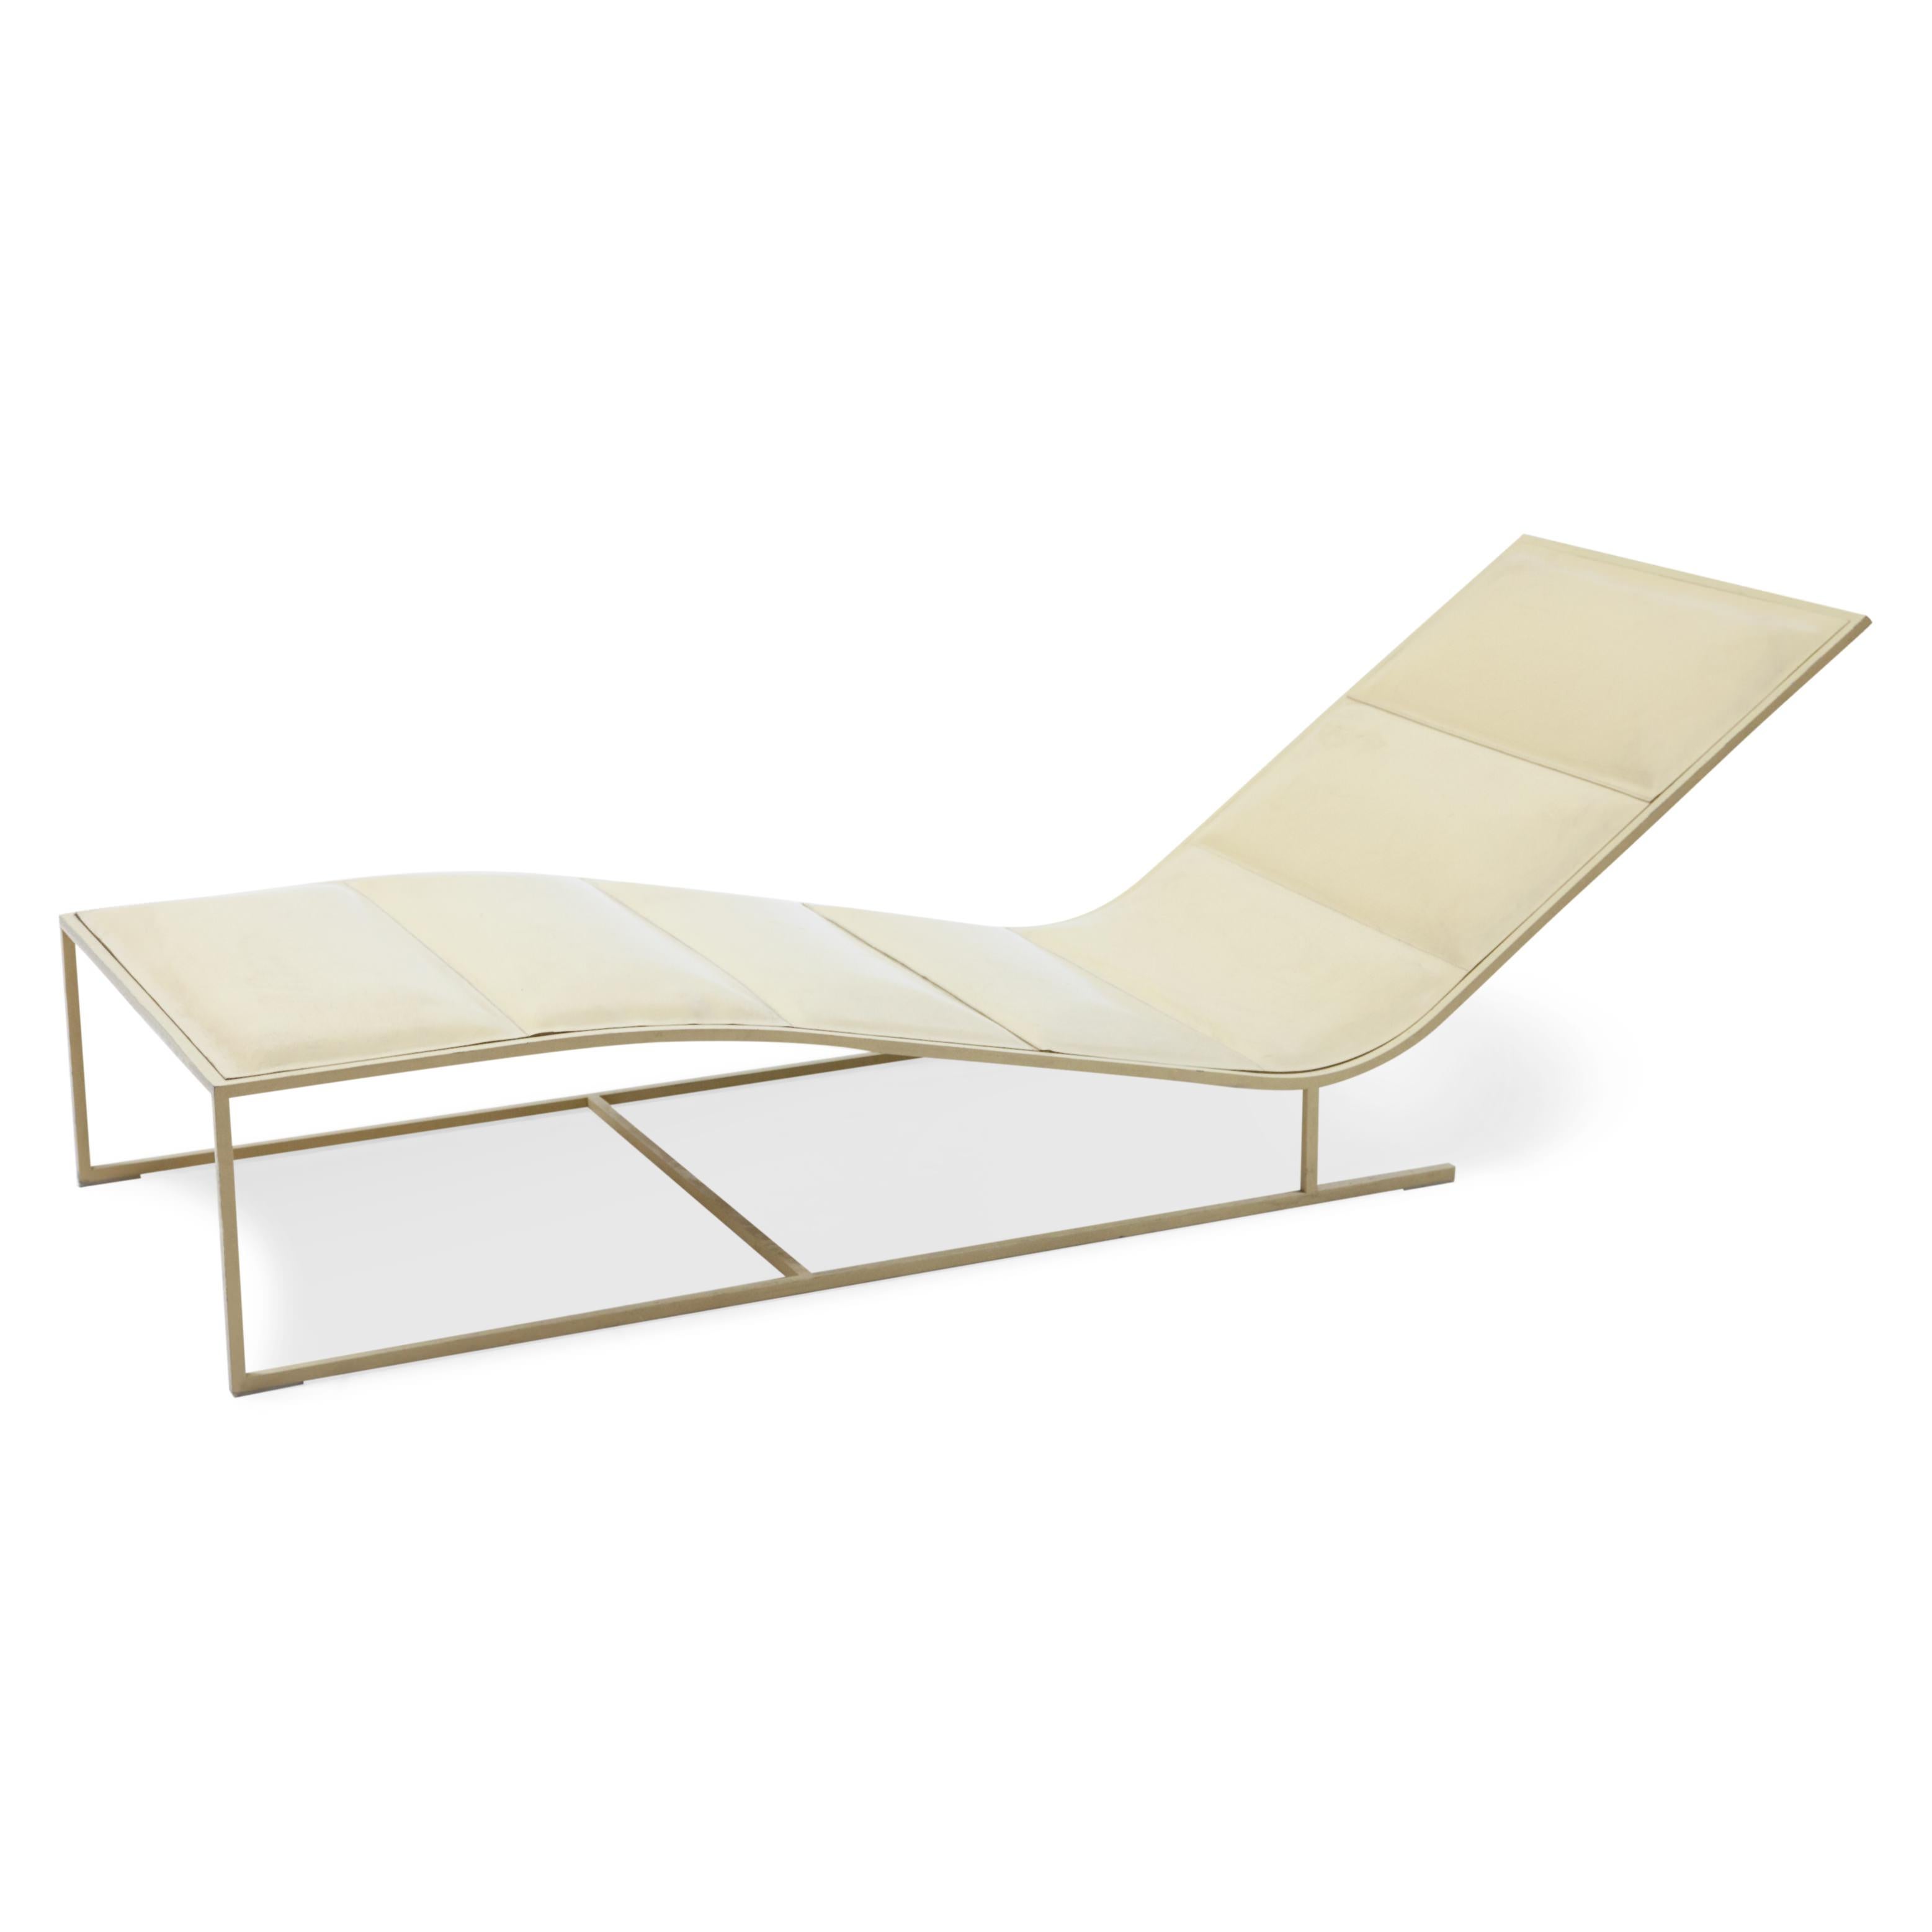 Resting on a linear cream lacquered iron frame, covered with faux leather in a corresponding colour. Signs of age and wear. The seat height varies from 16 to 32 cm.